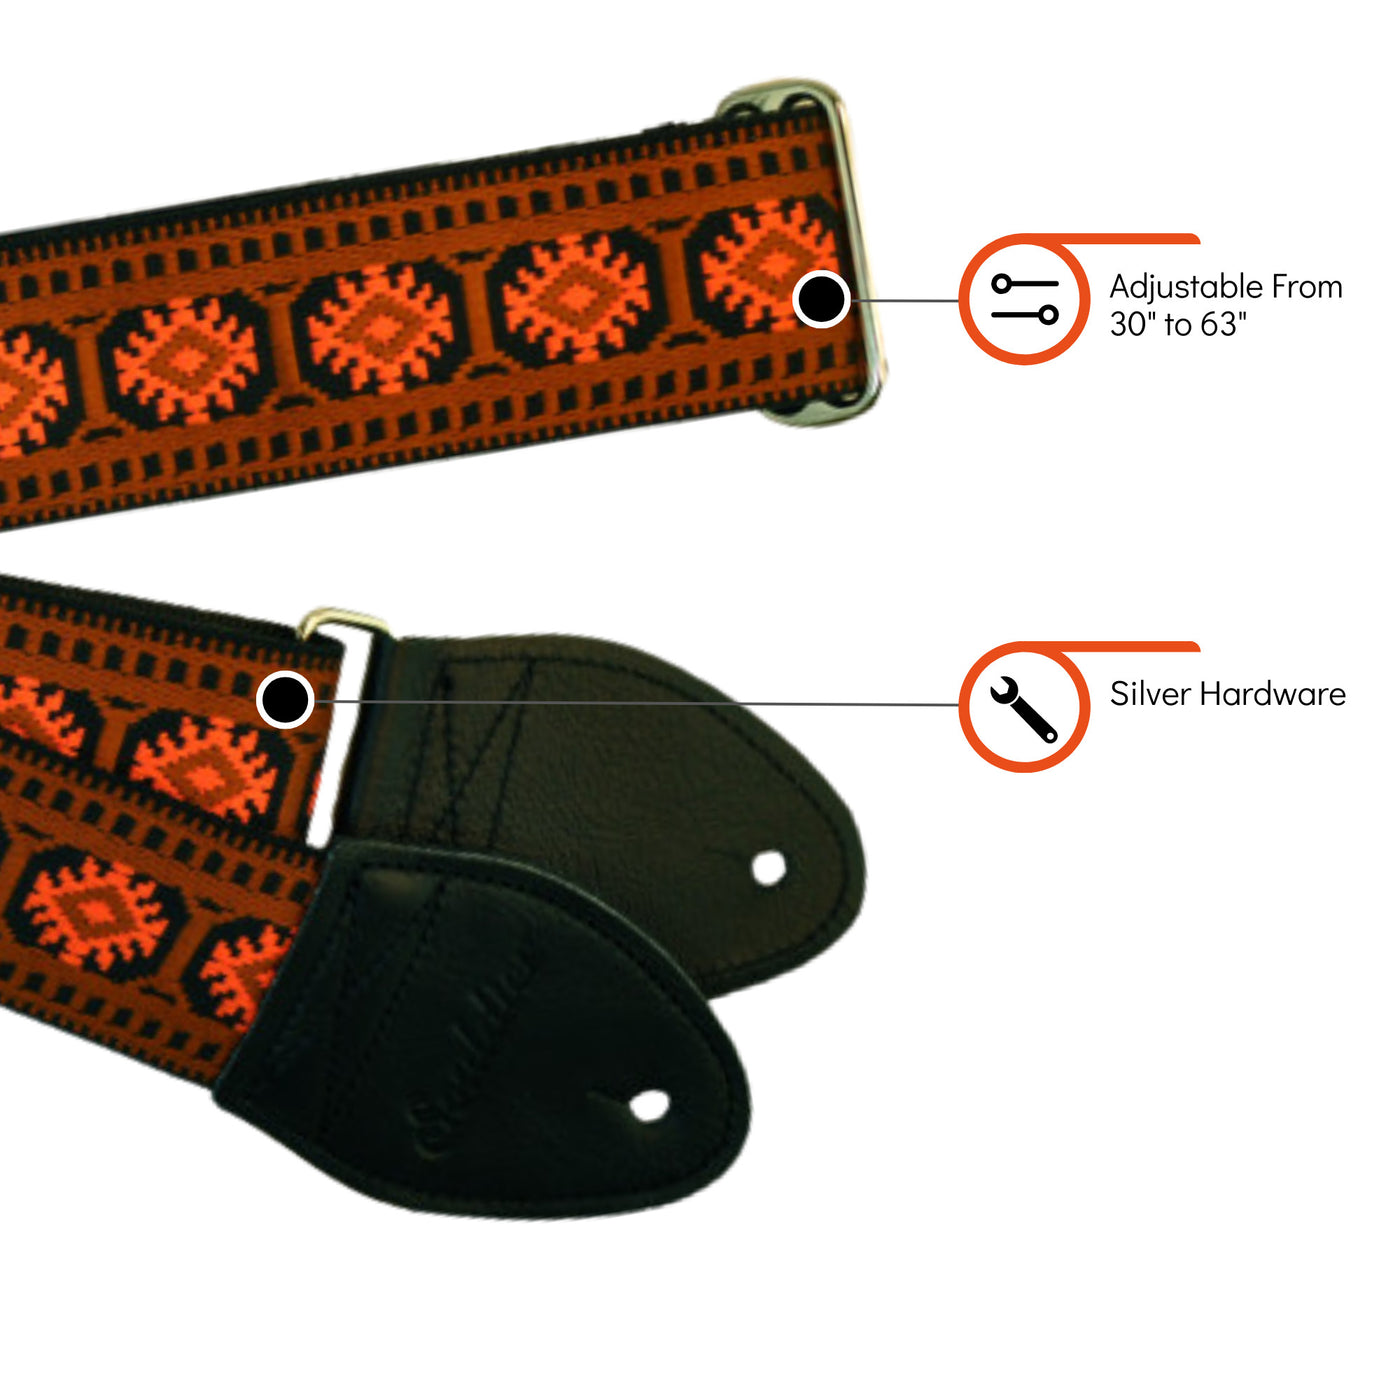 Souldier GS0179BK02BK - Handmade Seatbelt Guitar Strap for Bass, Electric or Acoustic Guitar, 2 Inches Wide and Adjustable Length from 30" to 63"  Made in the USA, Pillar, Brown and Orange